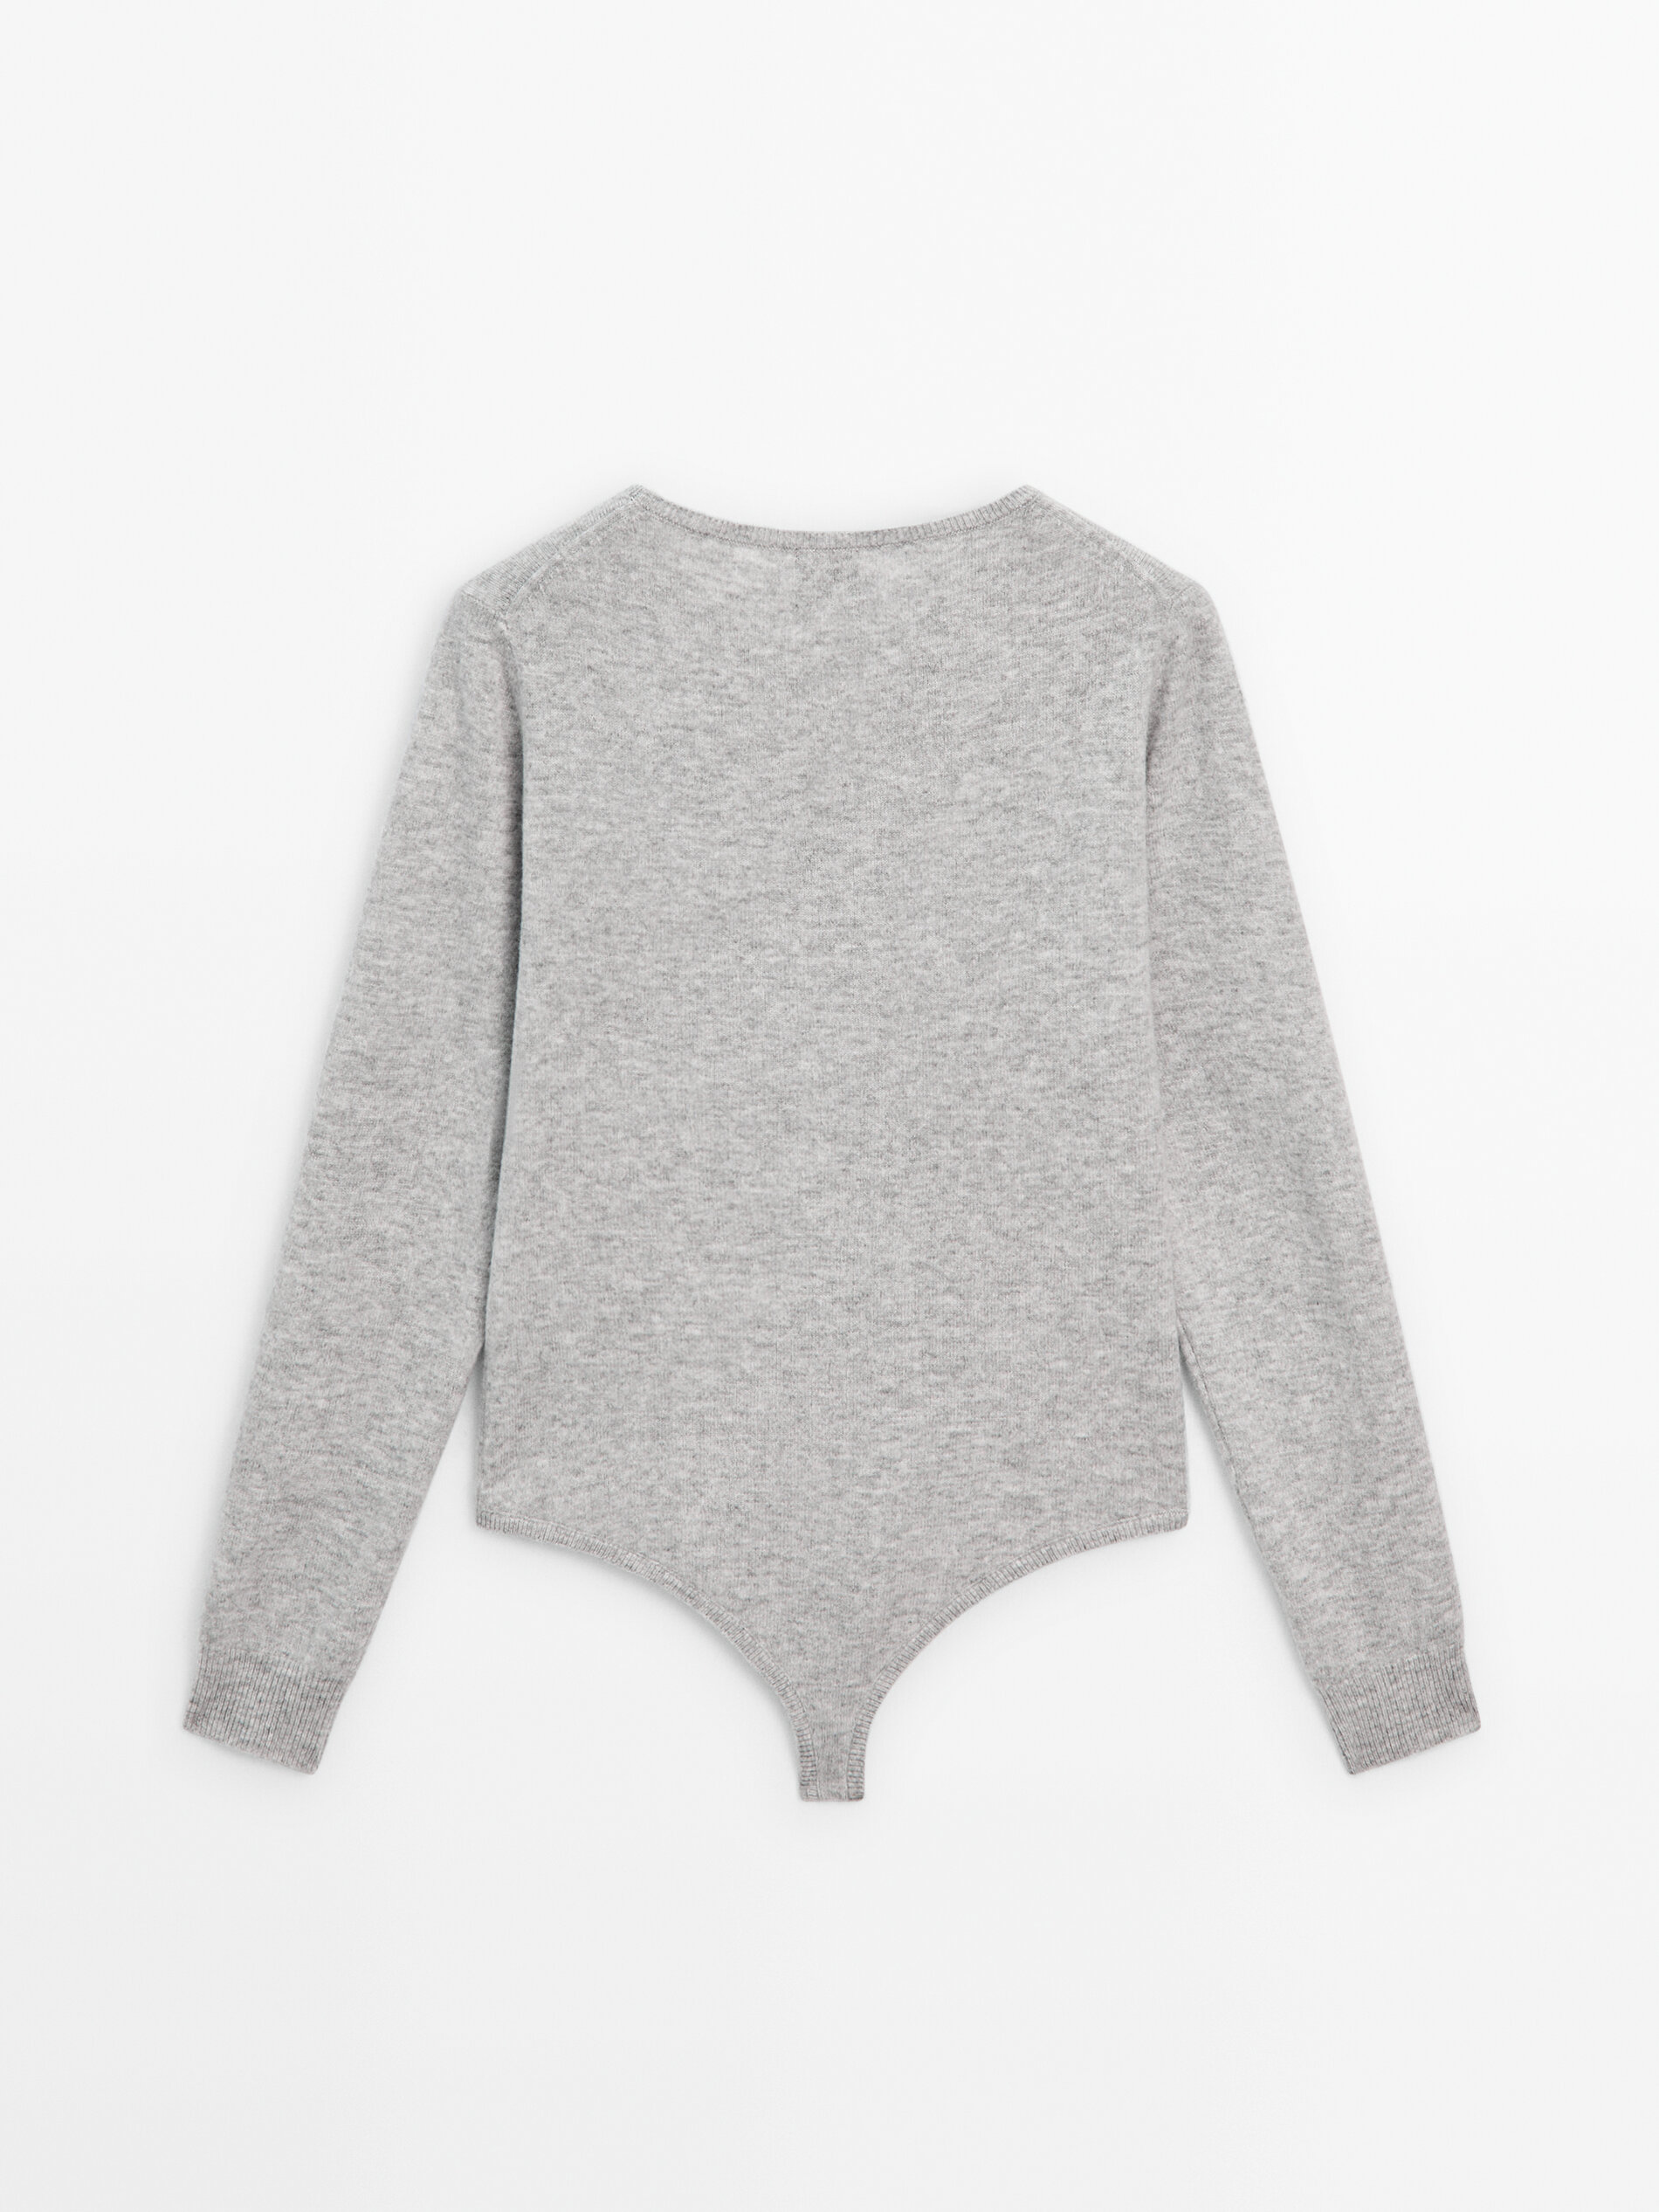 Knit long sleeve bodysuit - Studio · Grey Marl · Sweaters And